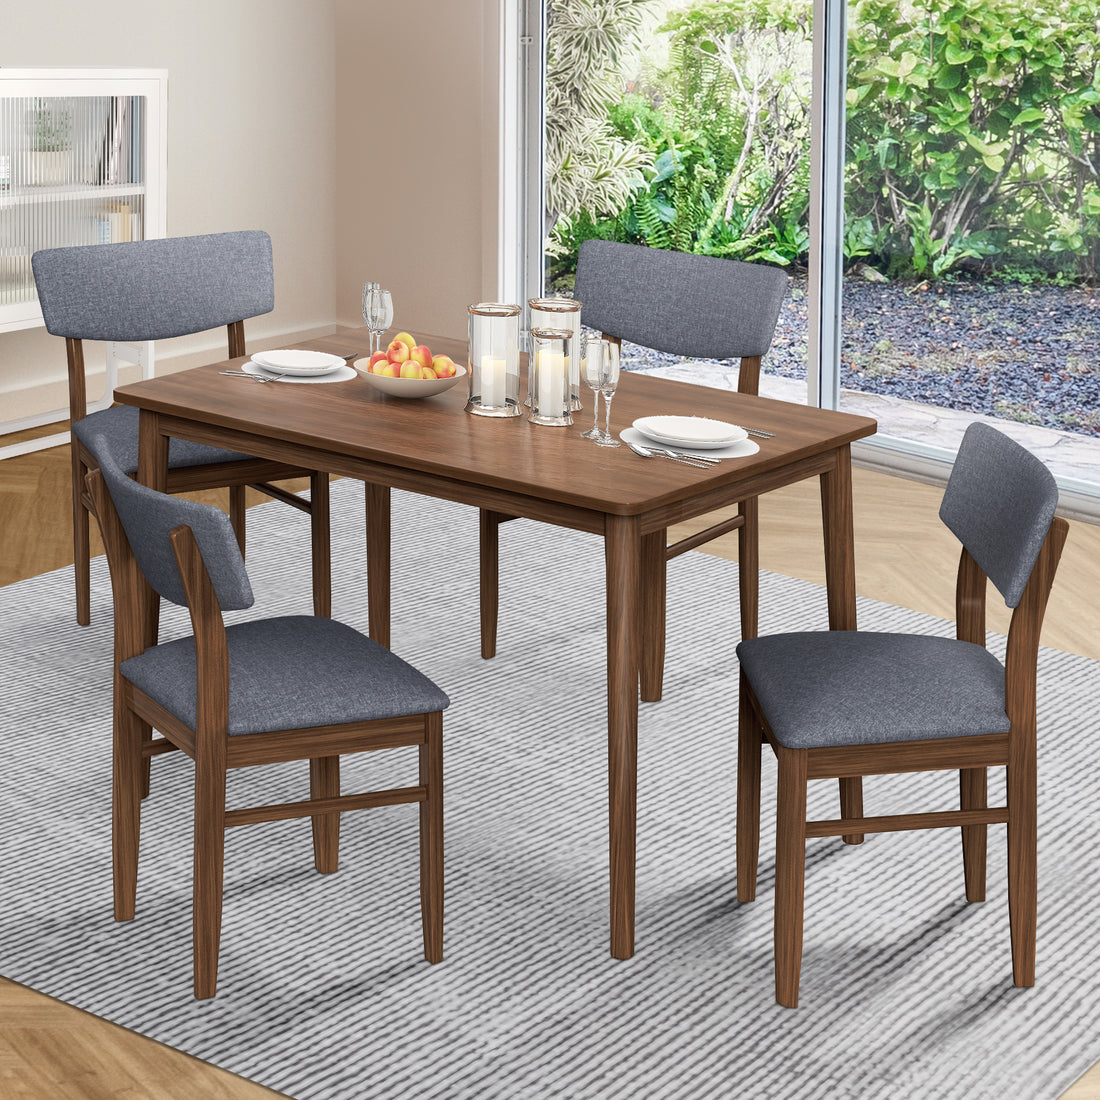 5 Pieces Modern Dining Table Set with 1 Rectangular walnut-rubber wood